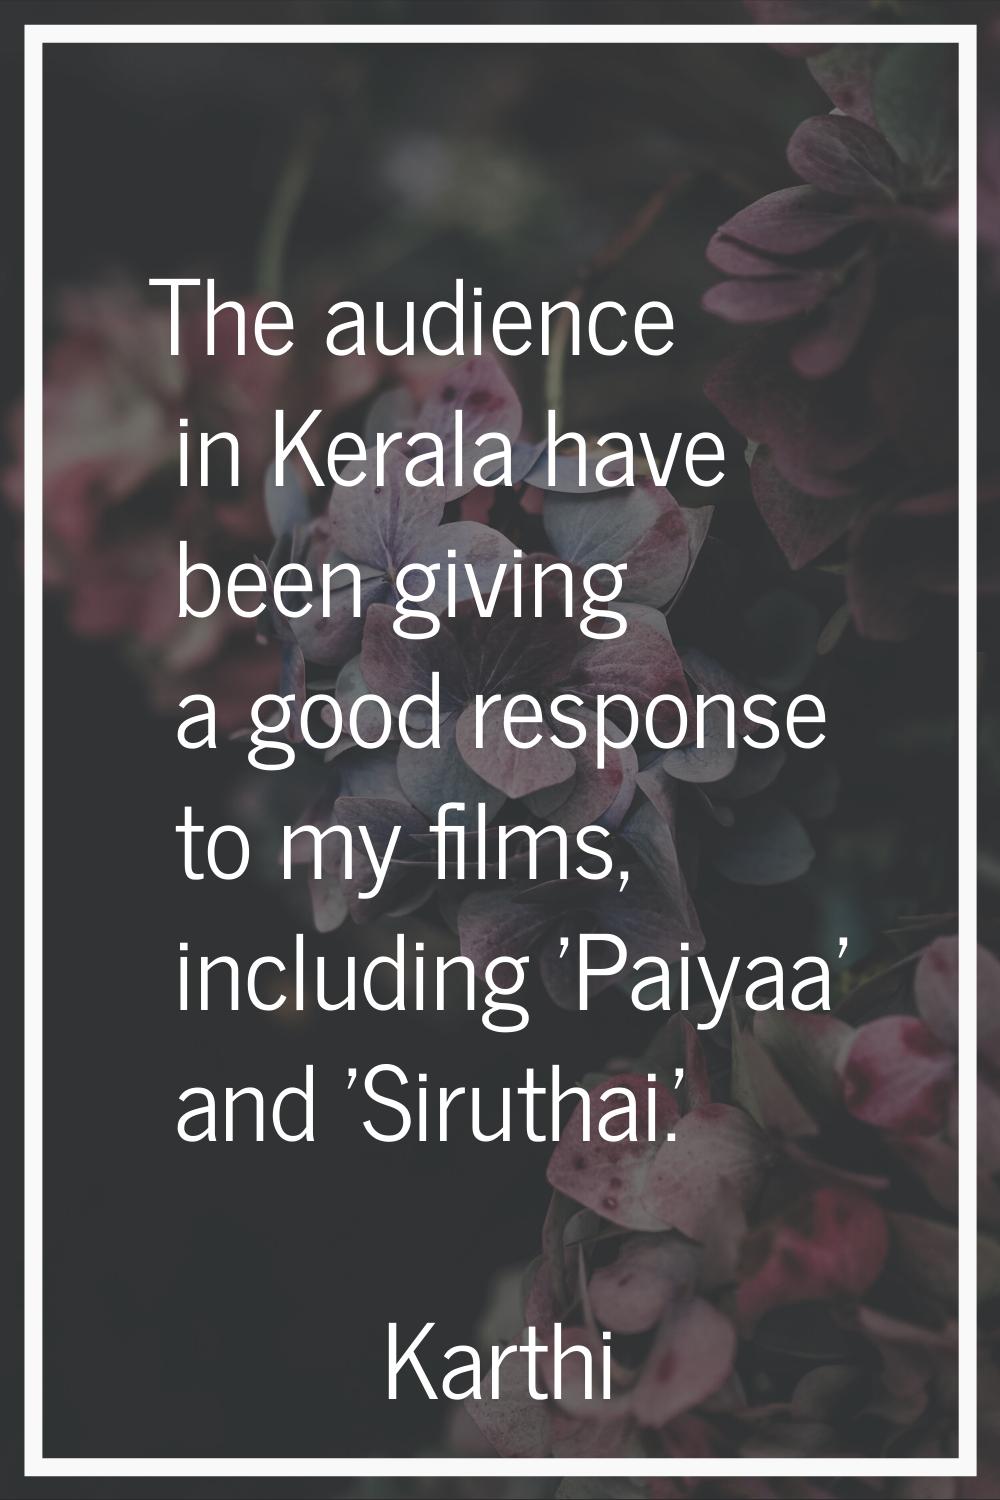 The audience in Kerala have been giving a good response to my films, including 'Paiyaa' and 'Siruth